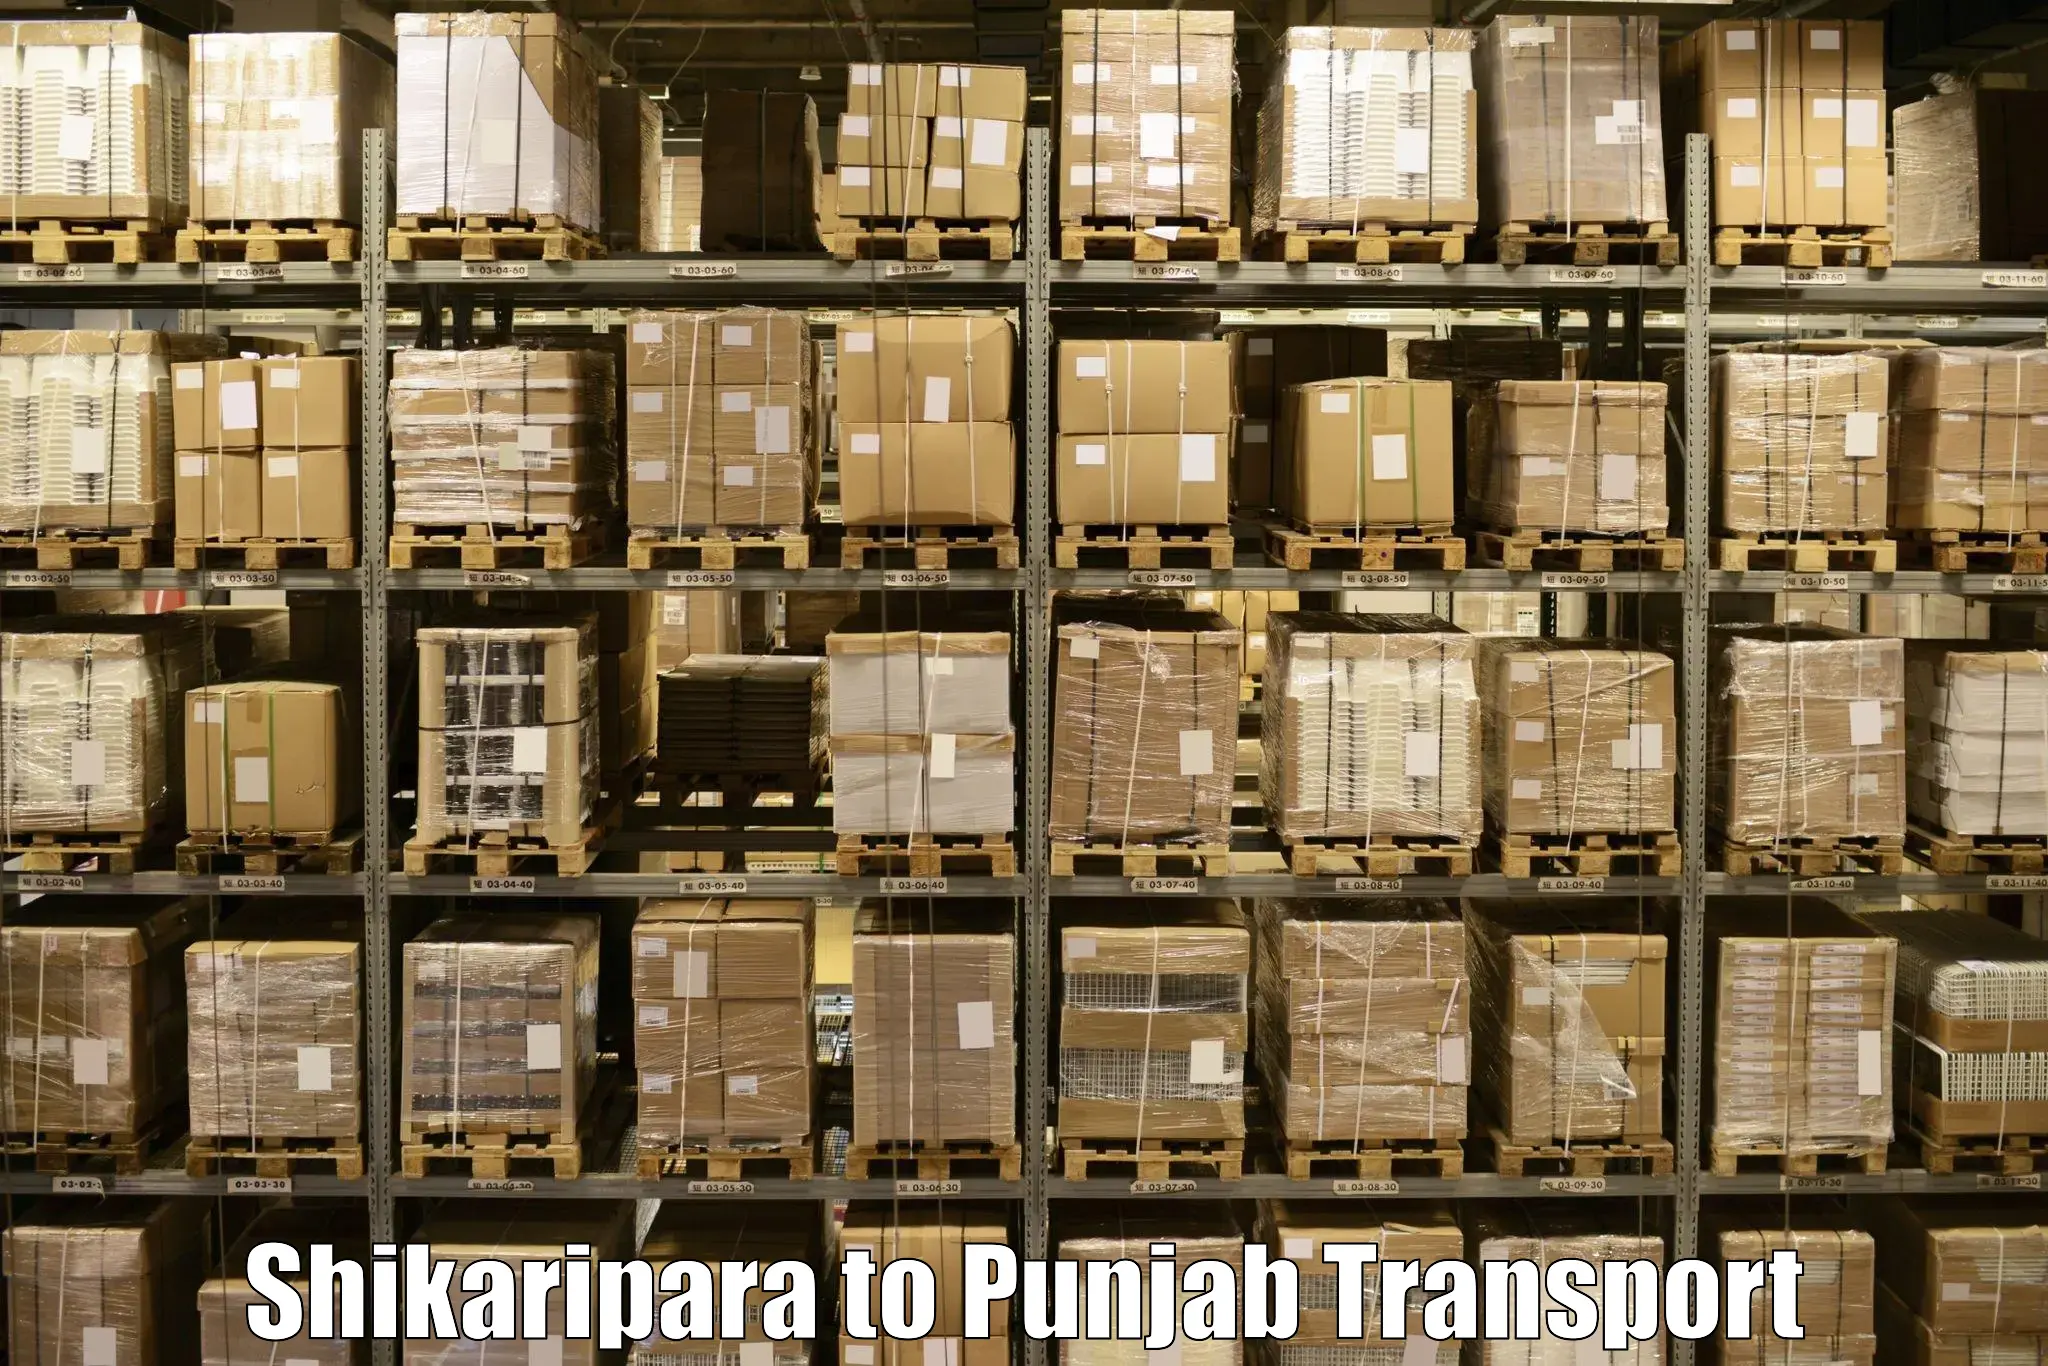 Transport bike from one state to another Shikaripara to Patiala